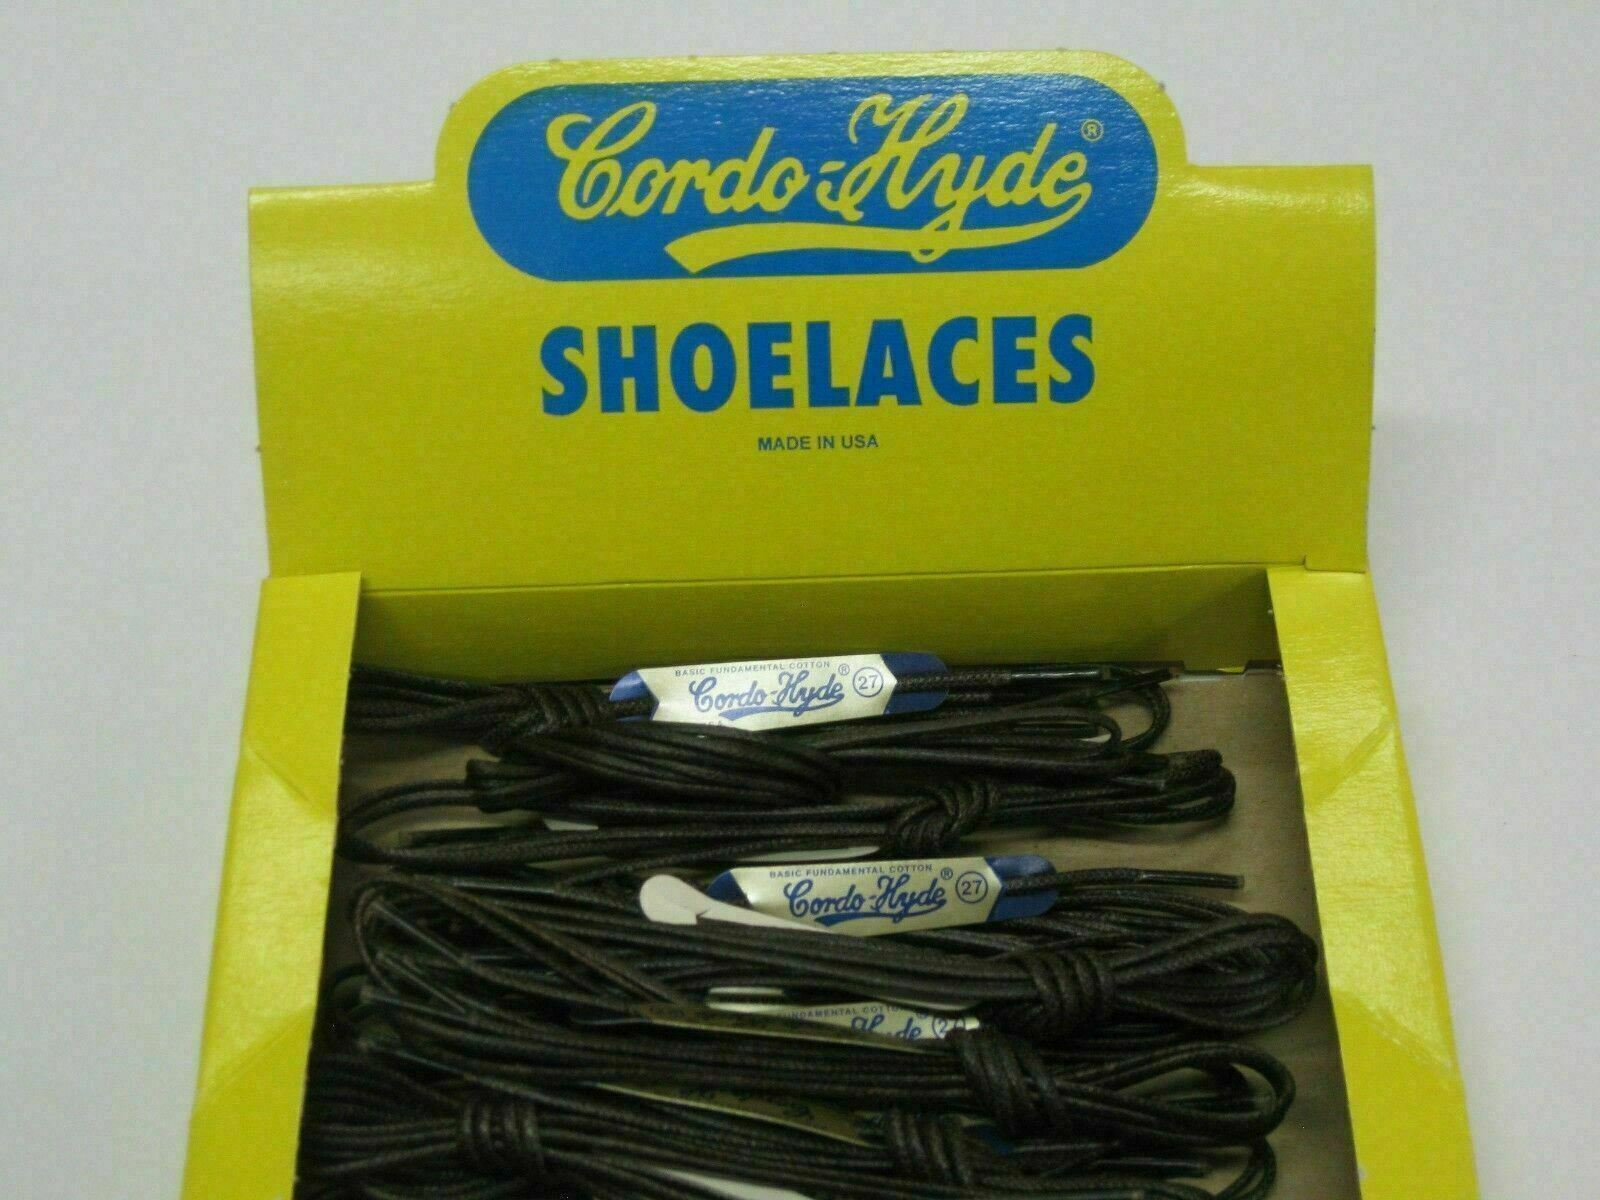 1 Pair - Wax Shoe Laces Thin Round Waxed Cordo Hyde - Made in USA - Dress Shoe